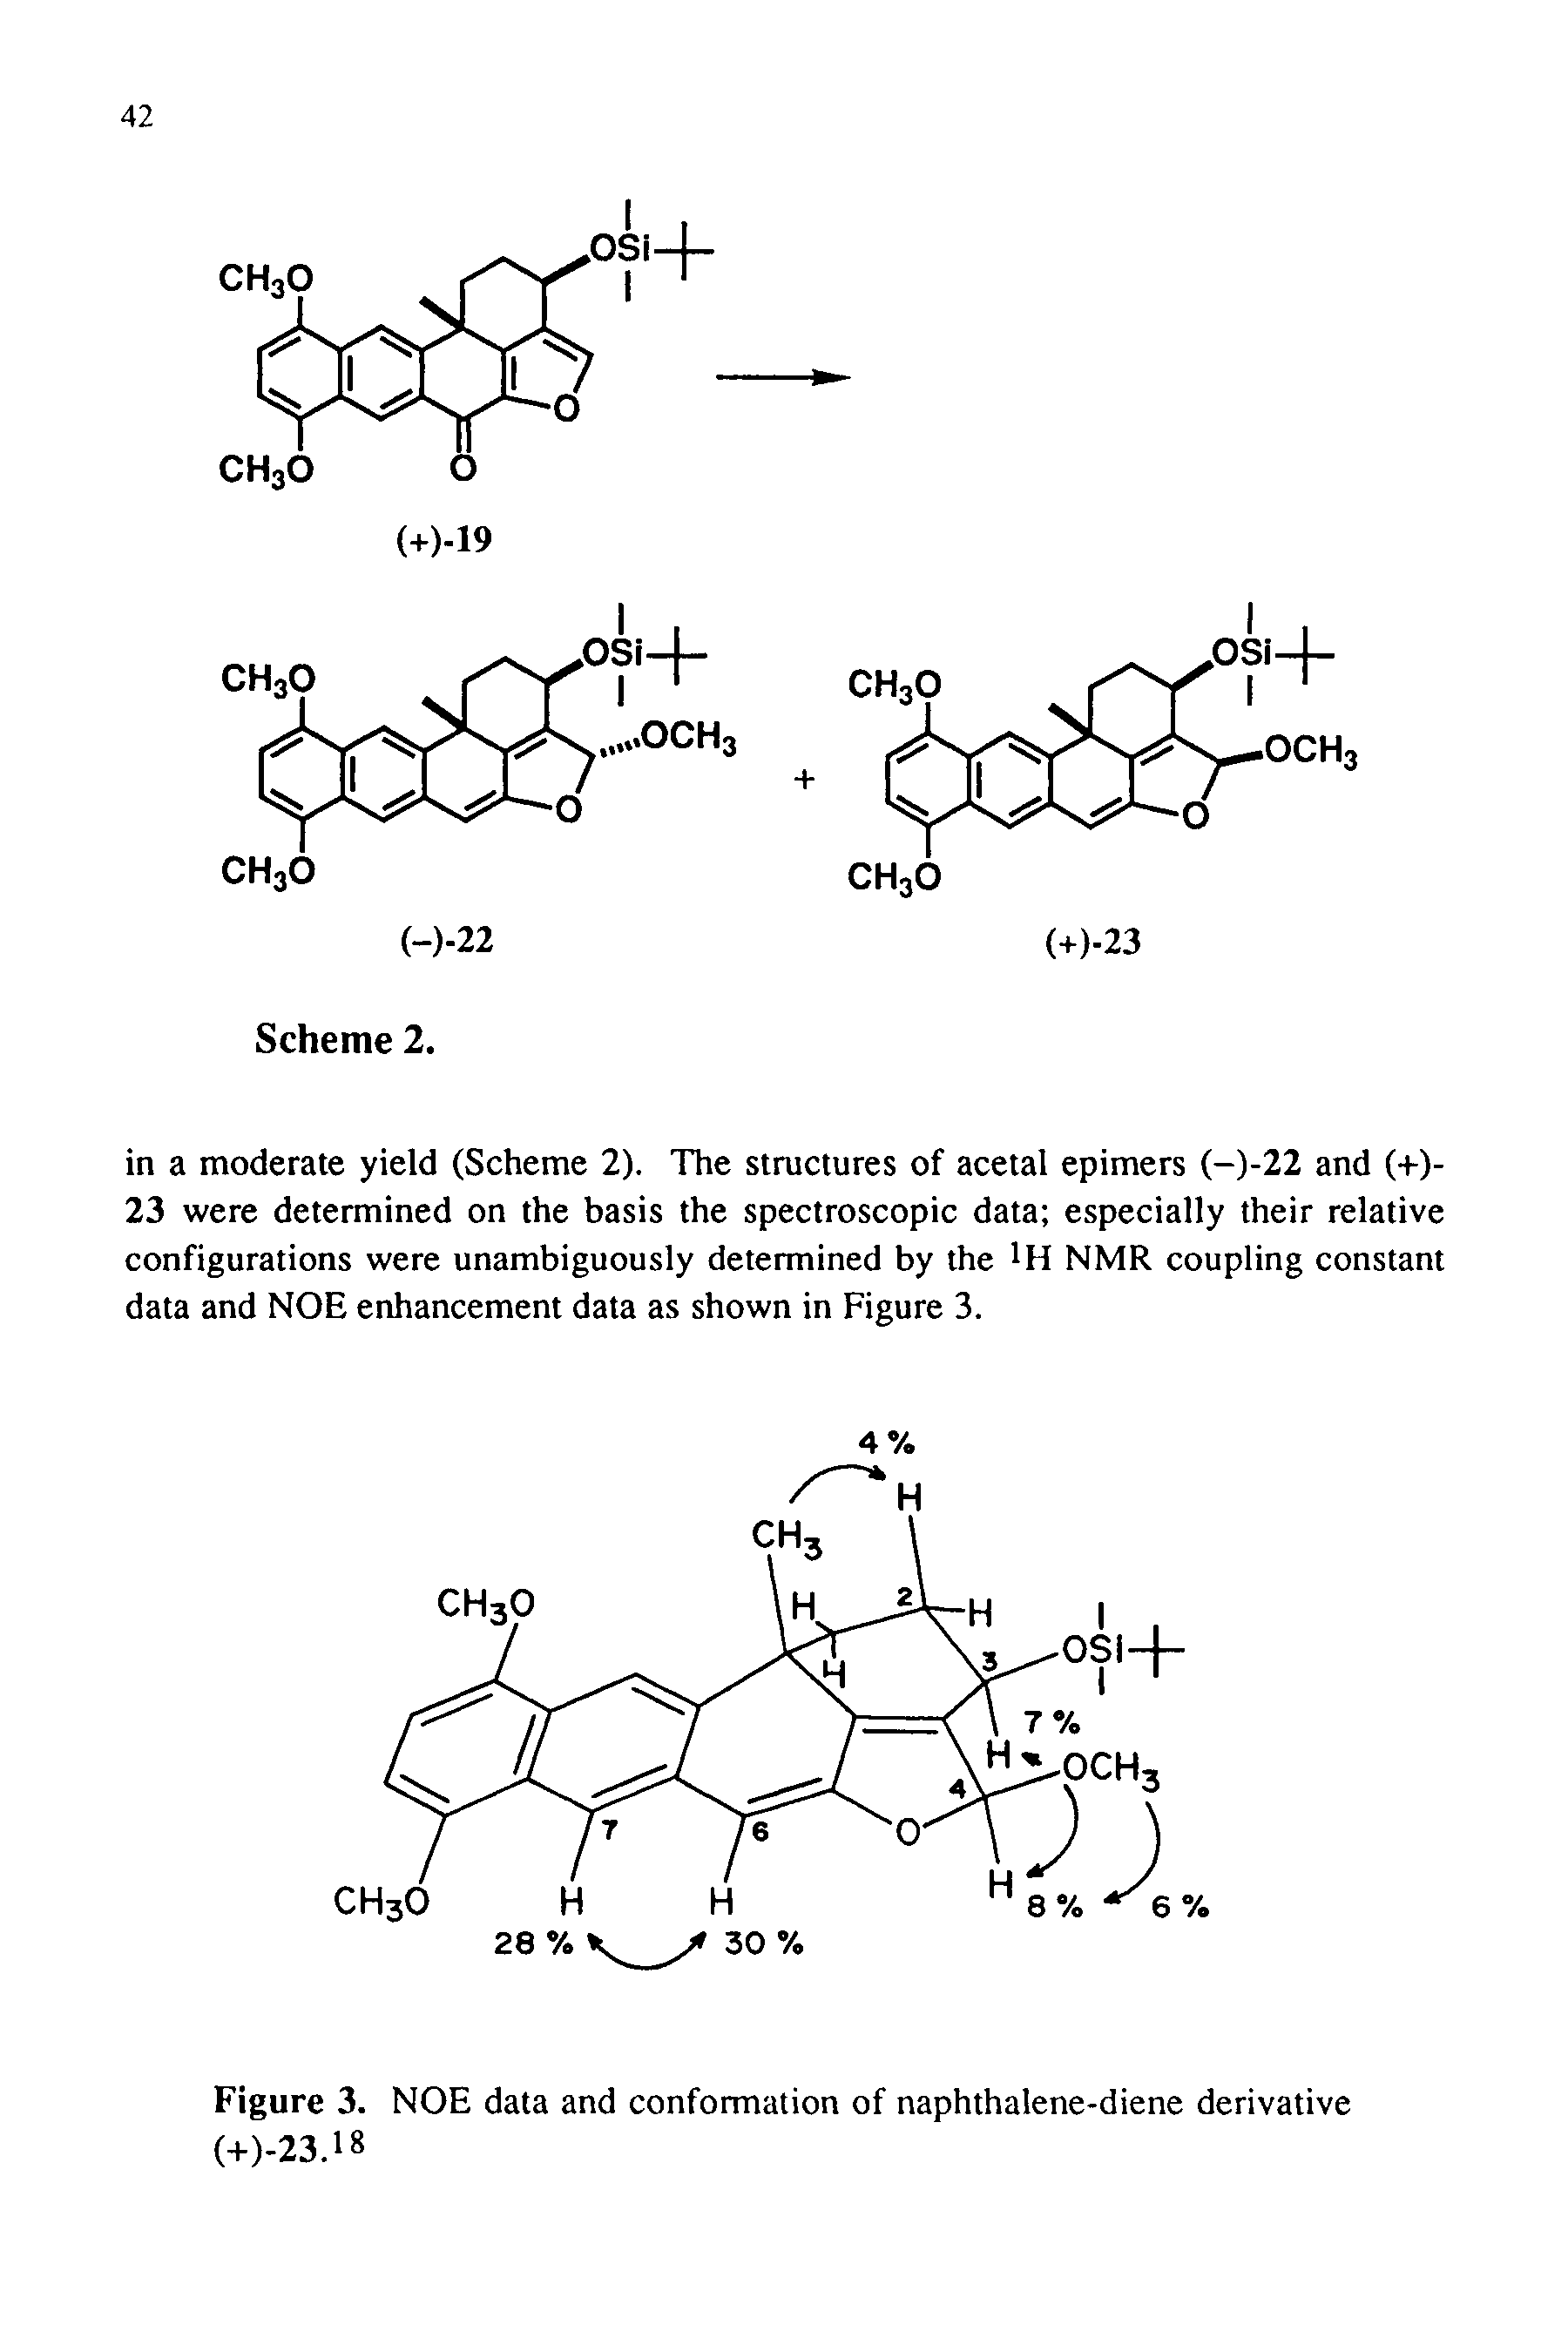 Figure 3. NOE data and conformation of naphthalene-diene derivative (-i-)-23.18...